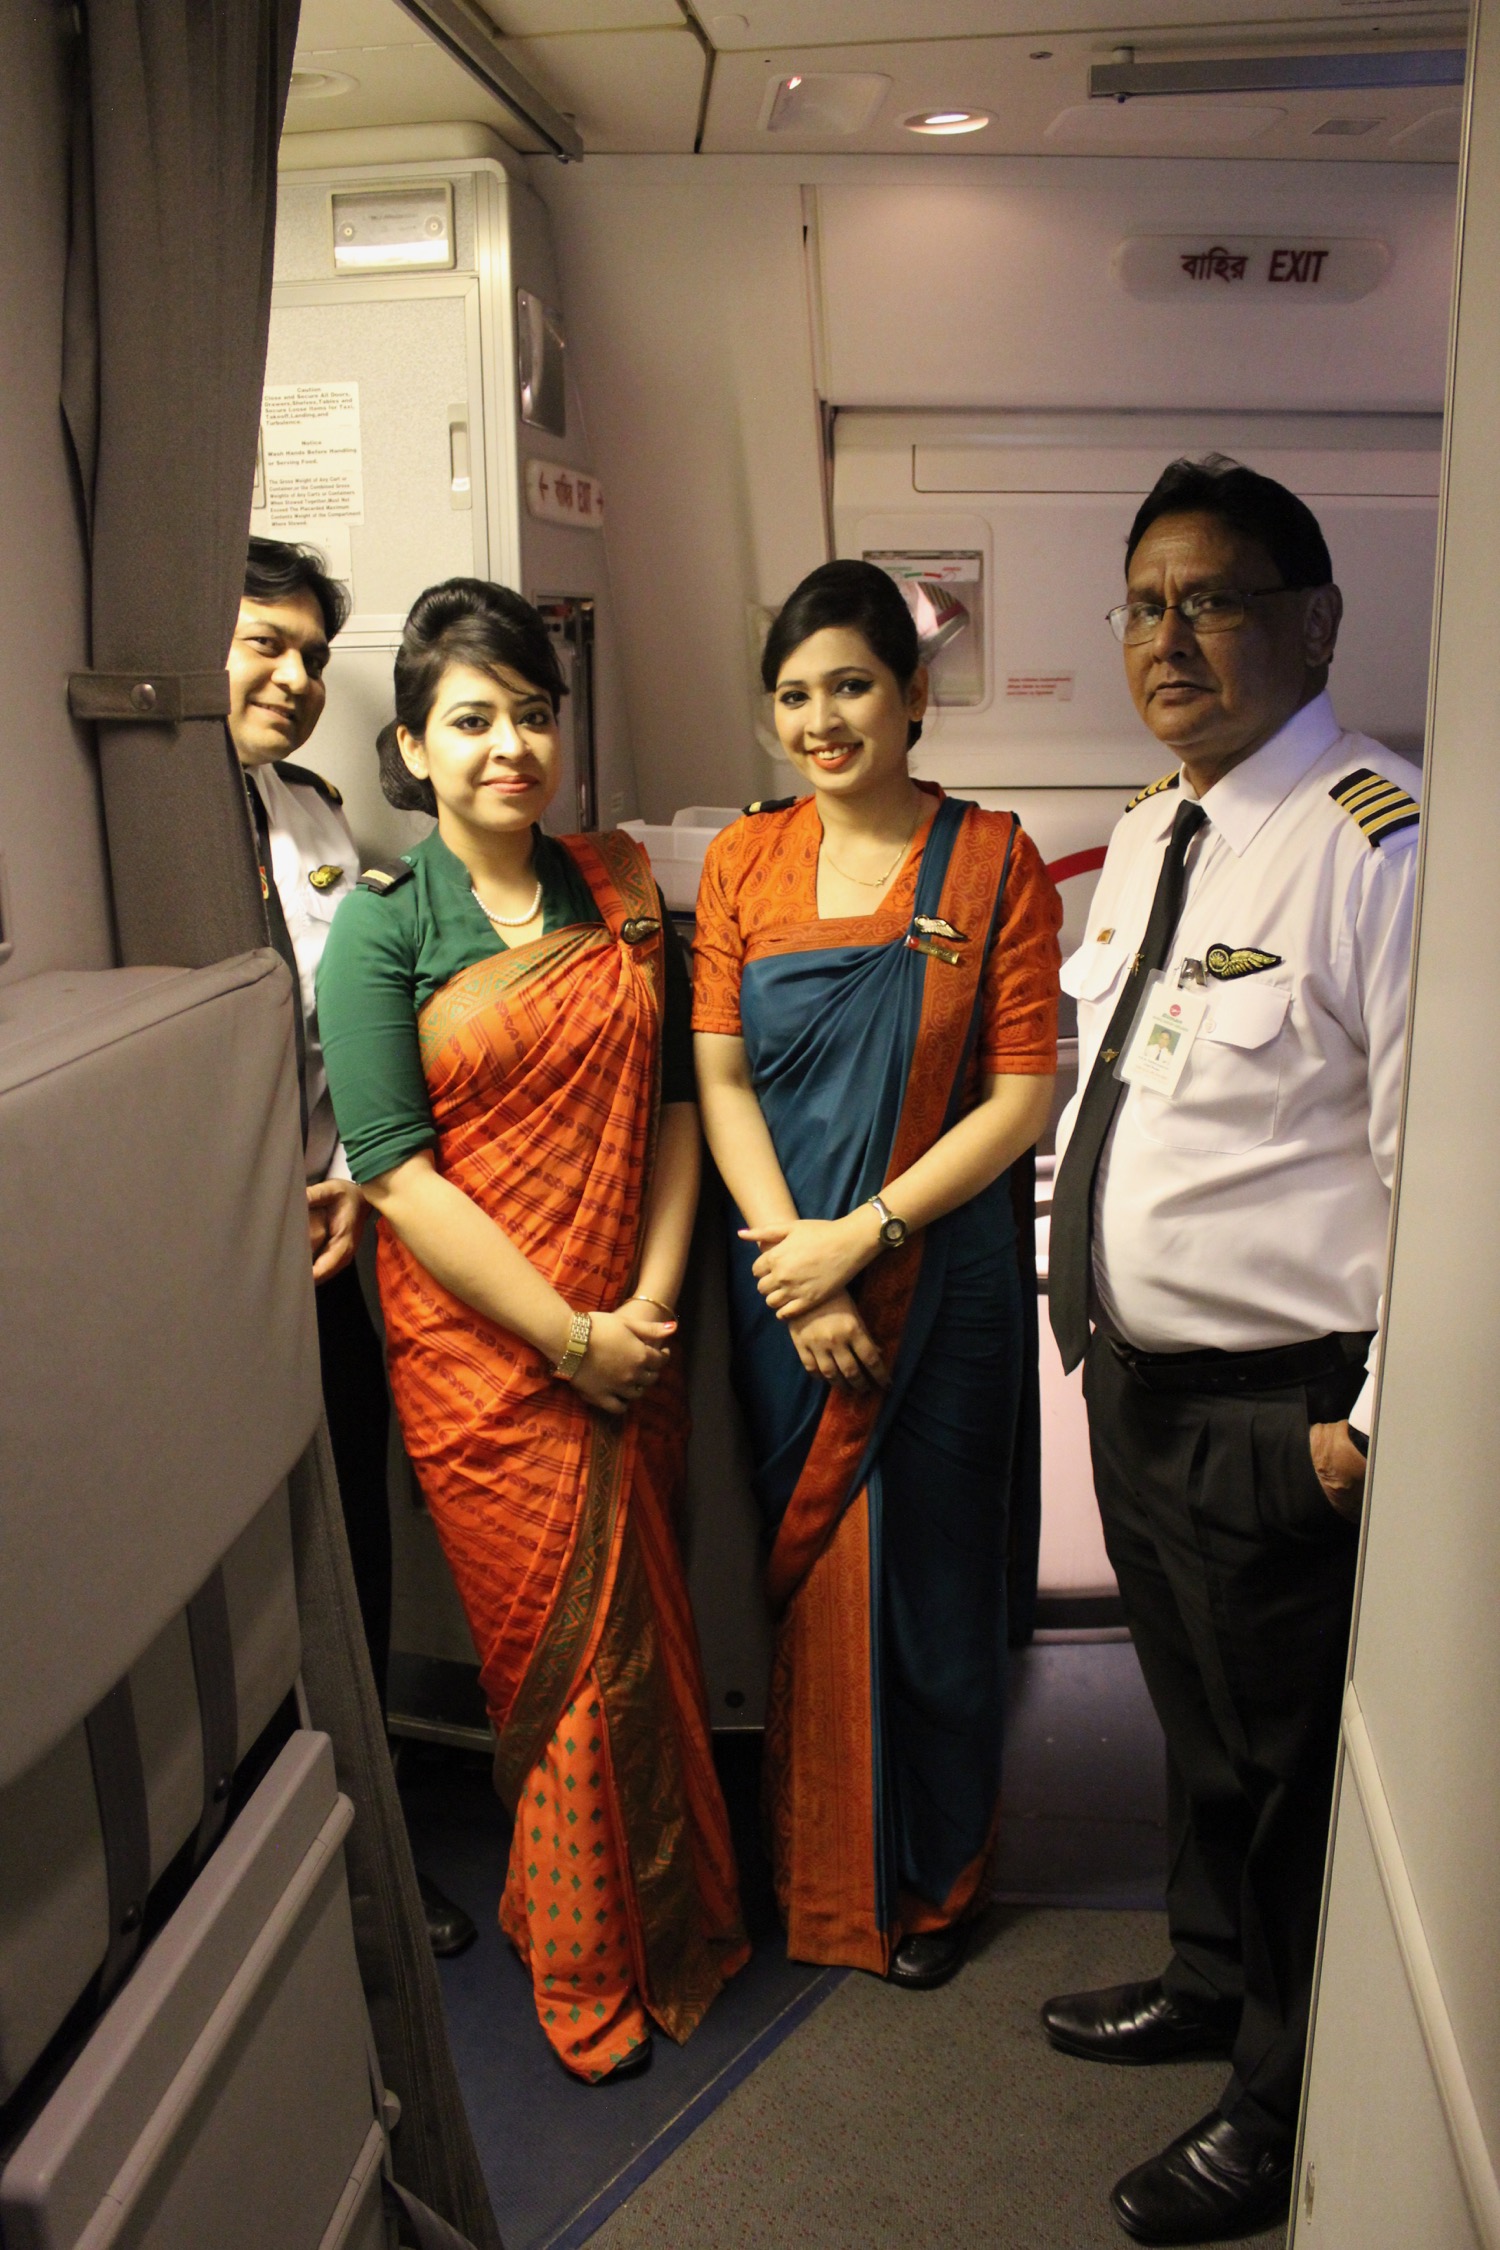 a group of people standing in an airplane